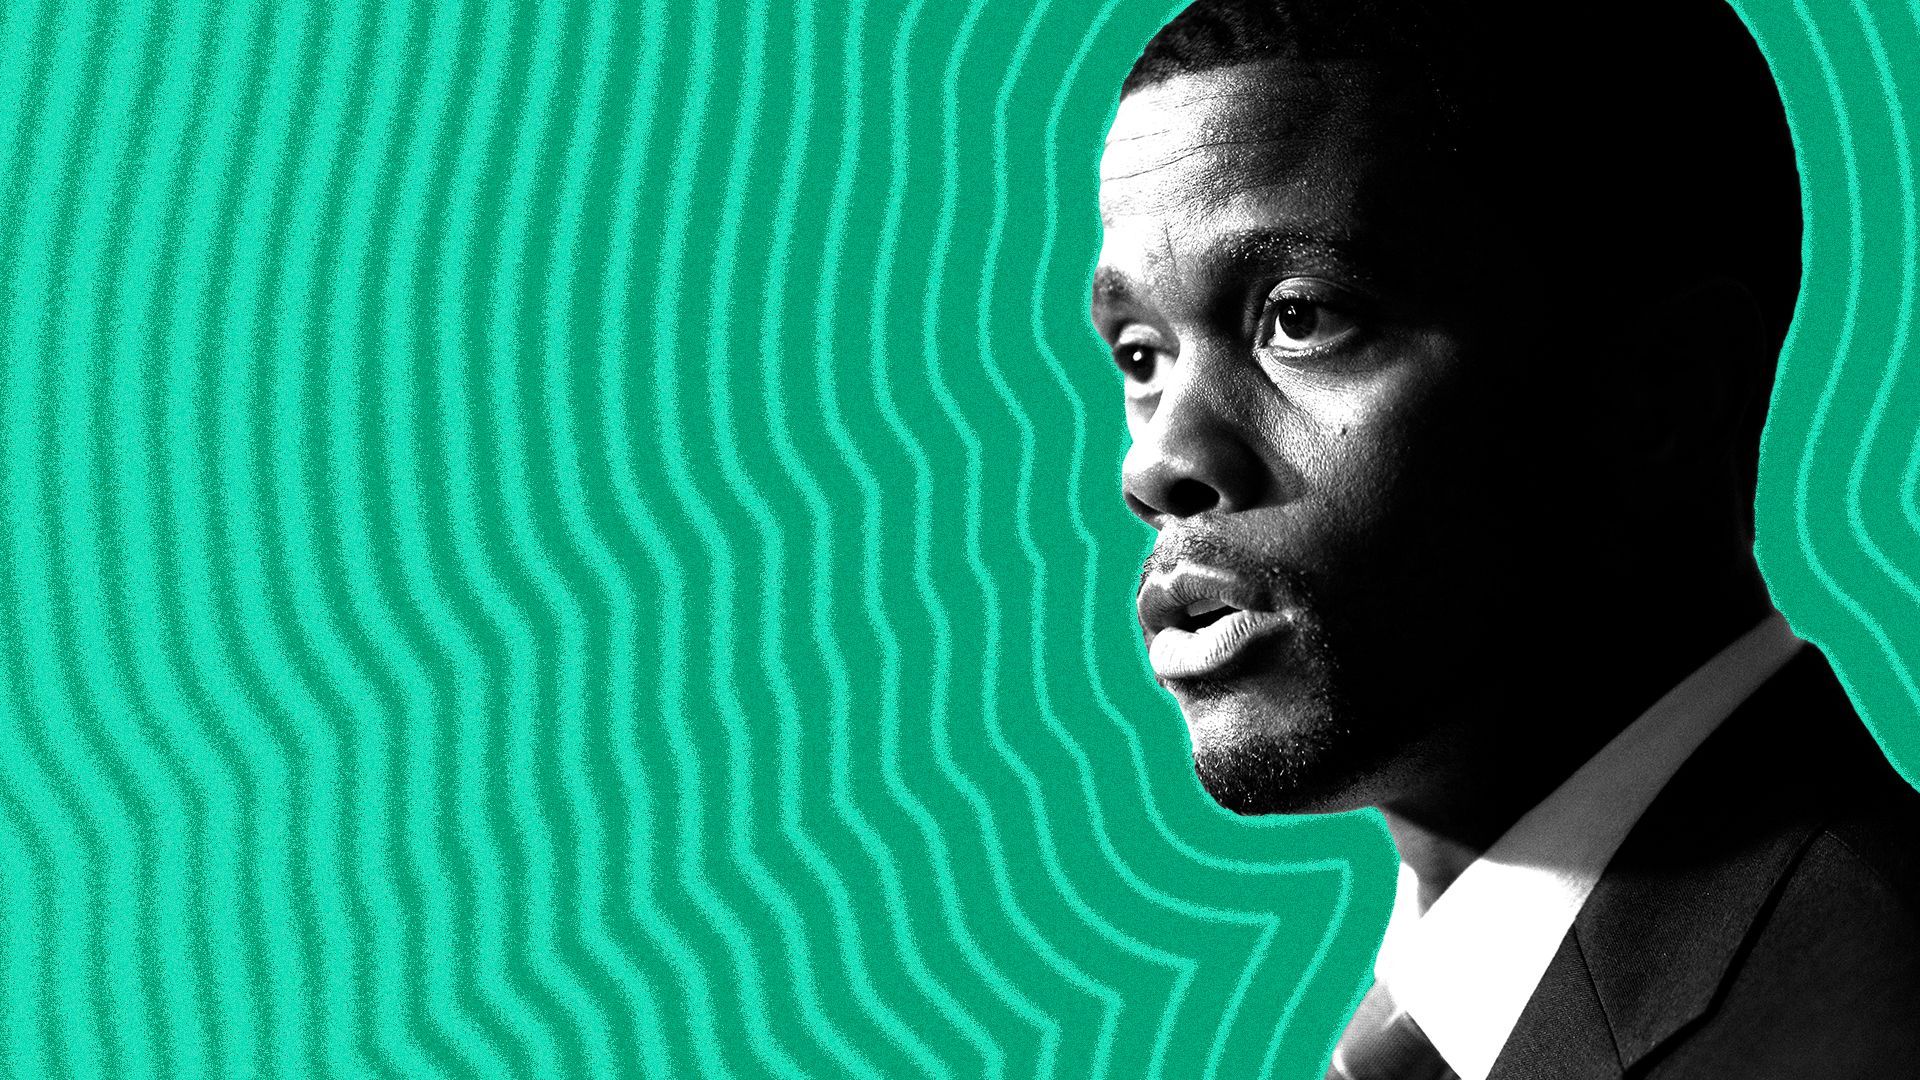 Photo illustration of St. Paul Mayor Melvin Carter with lines radiating from him. 